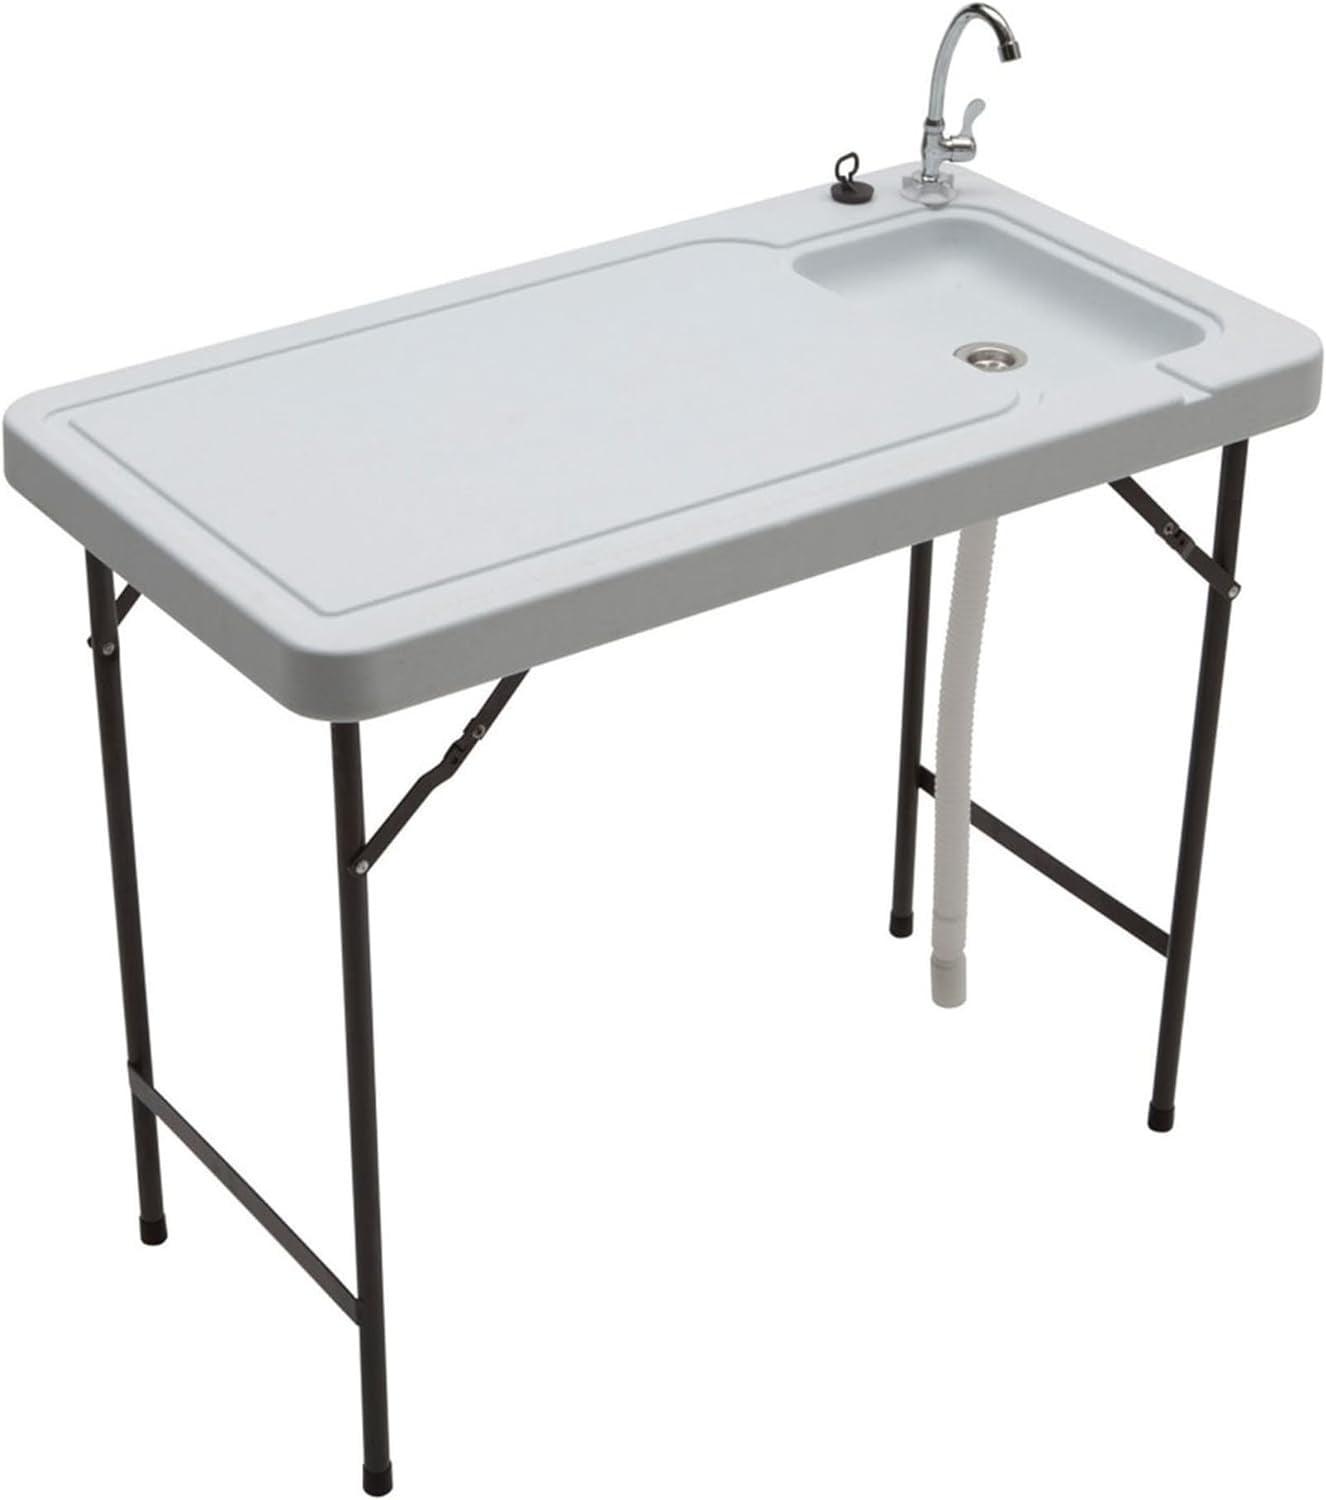 Outdoor Folding Fish & Game Cleaning Table with Quick-Connect Faucet